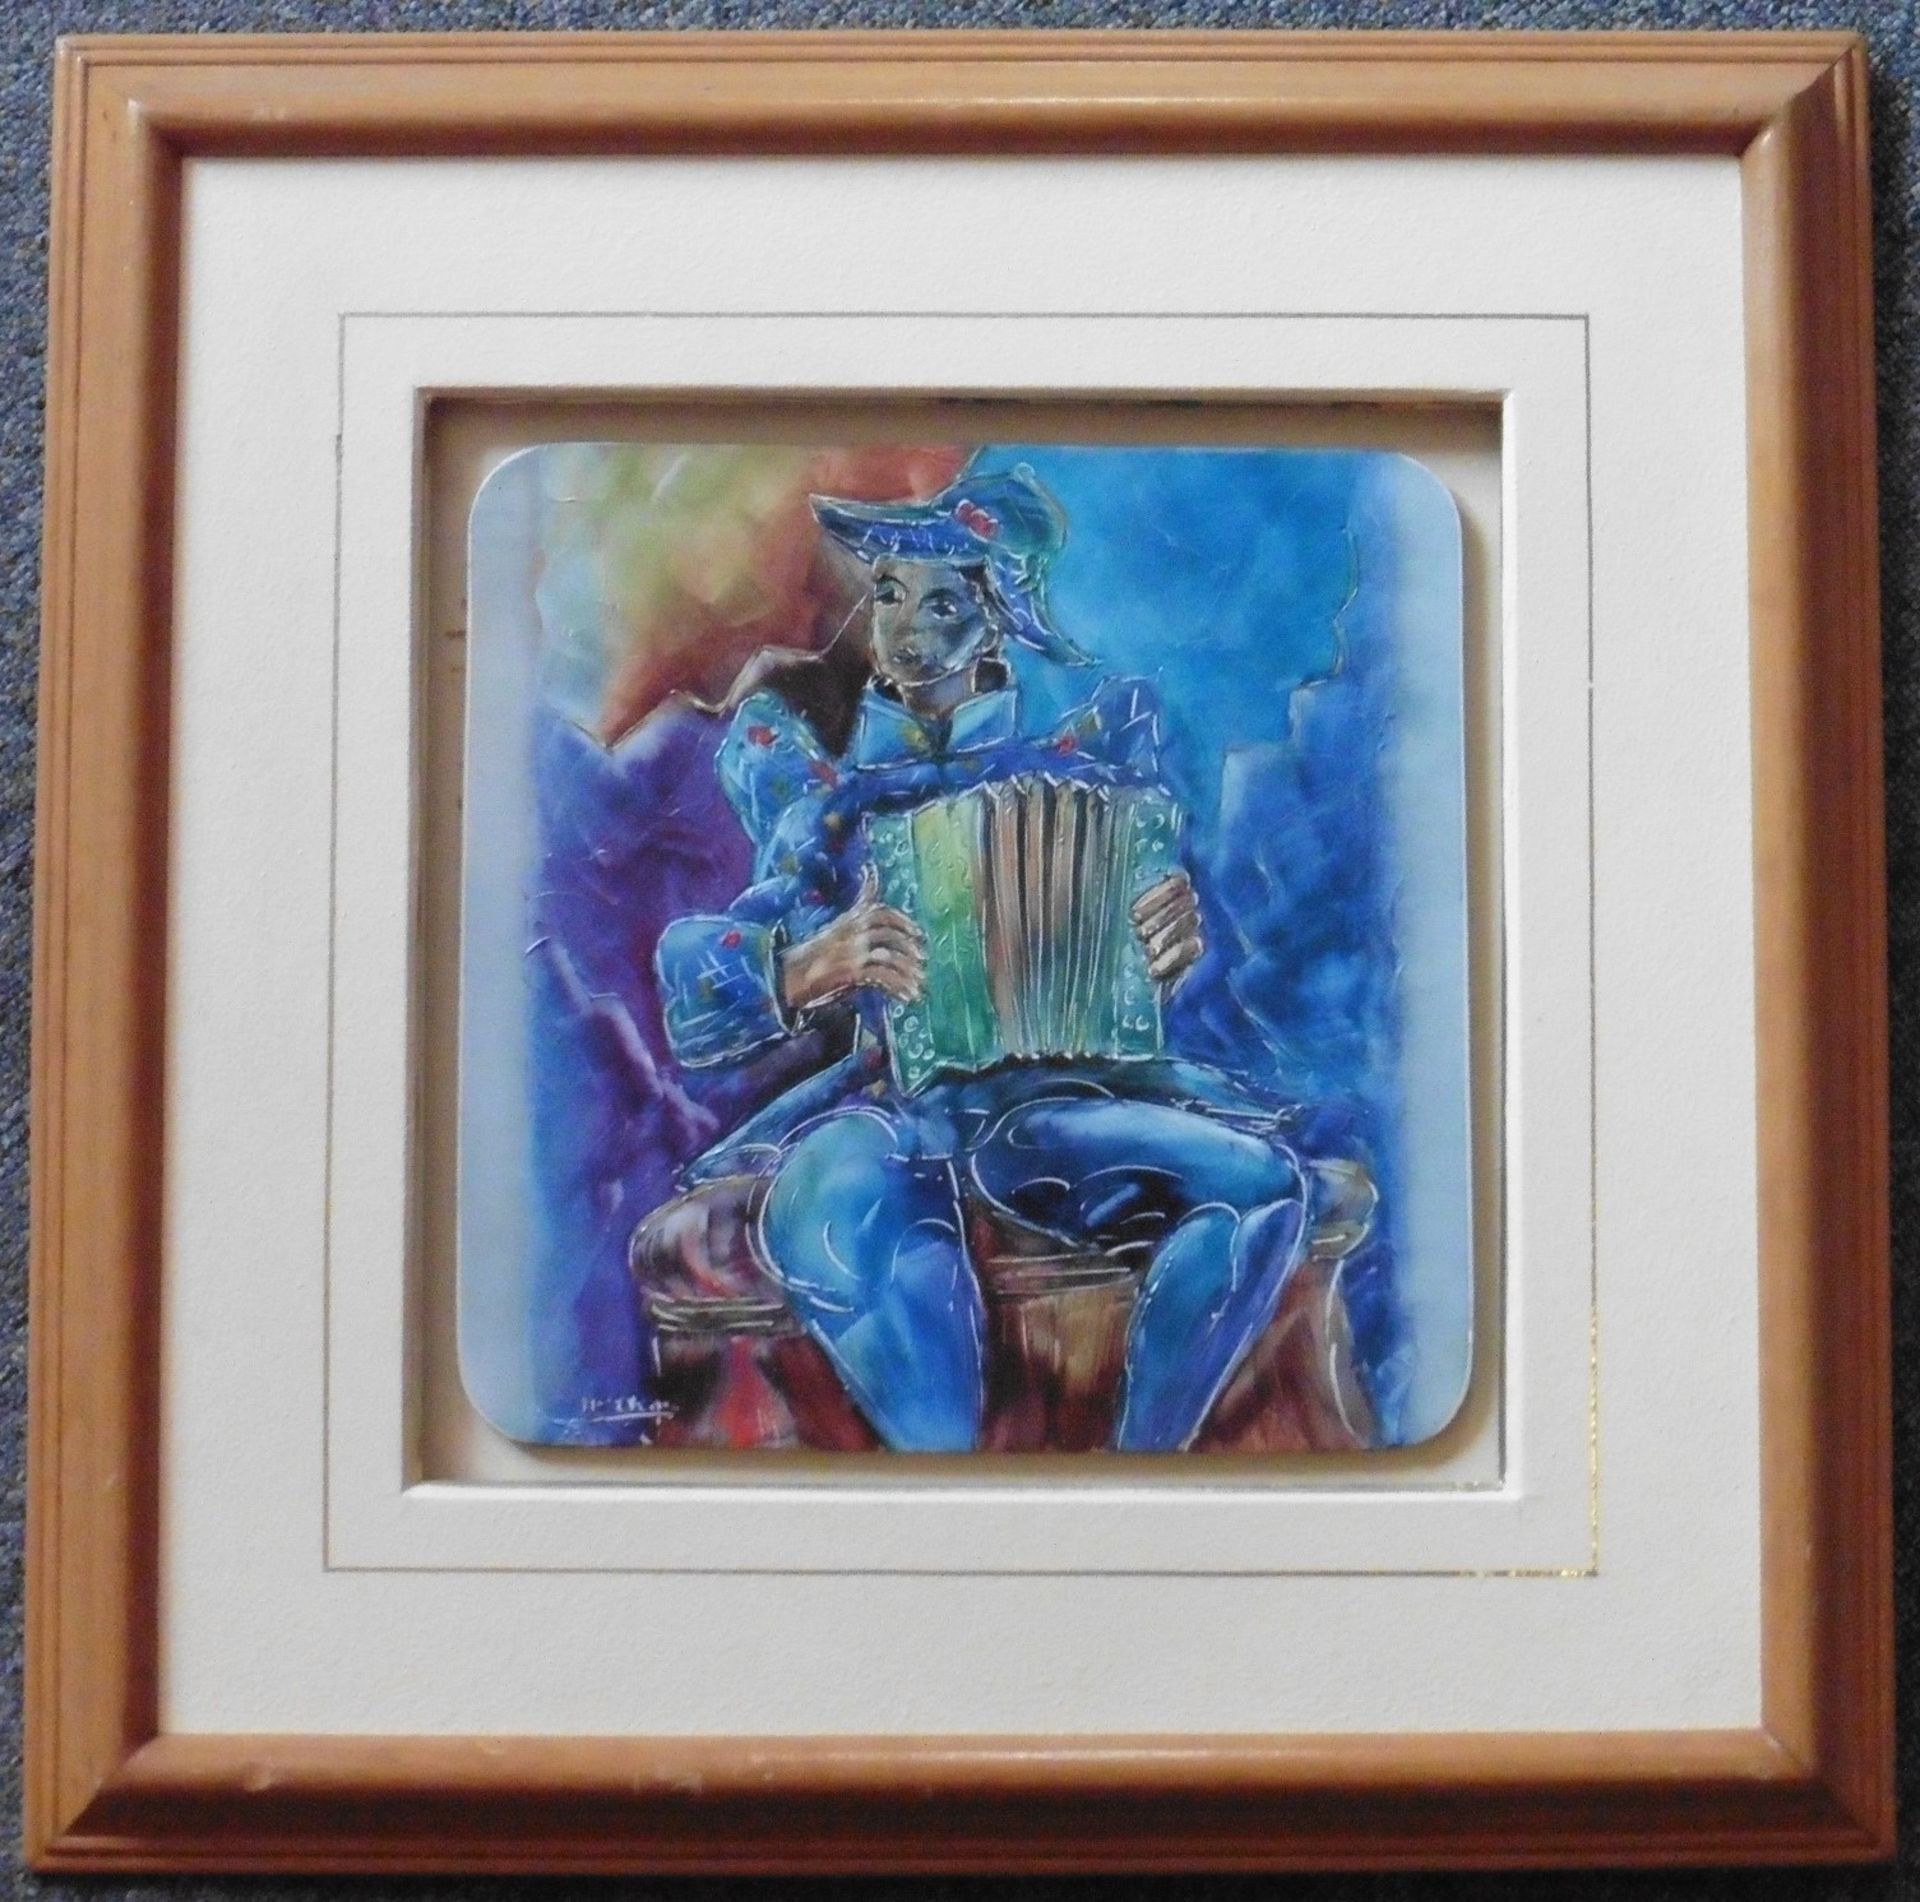 Framed painted ceramic tile “The accordion player” indistinctly signed within the tile - Image 6 of 6